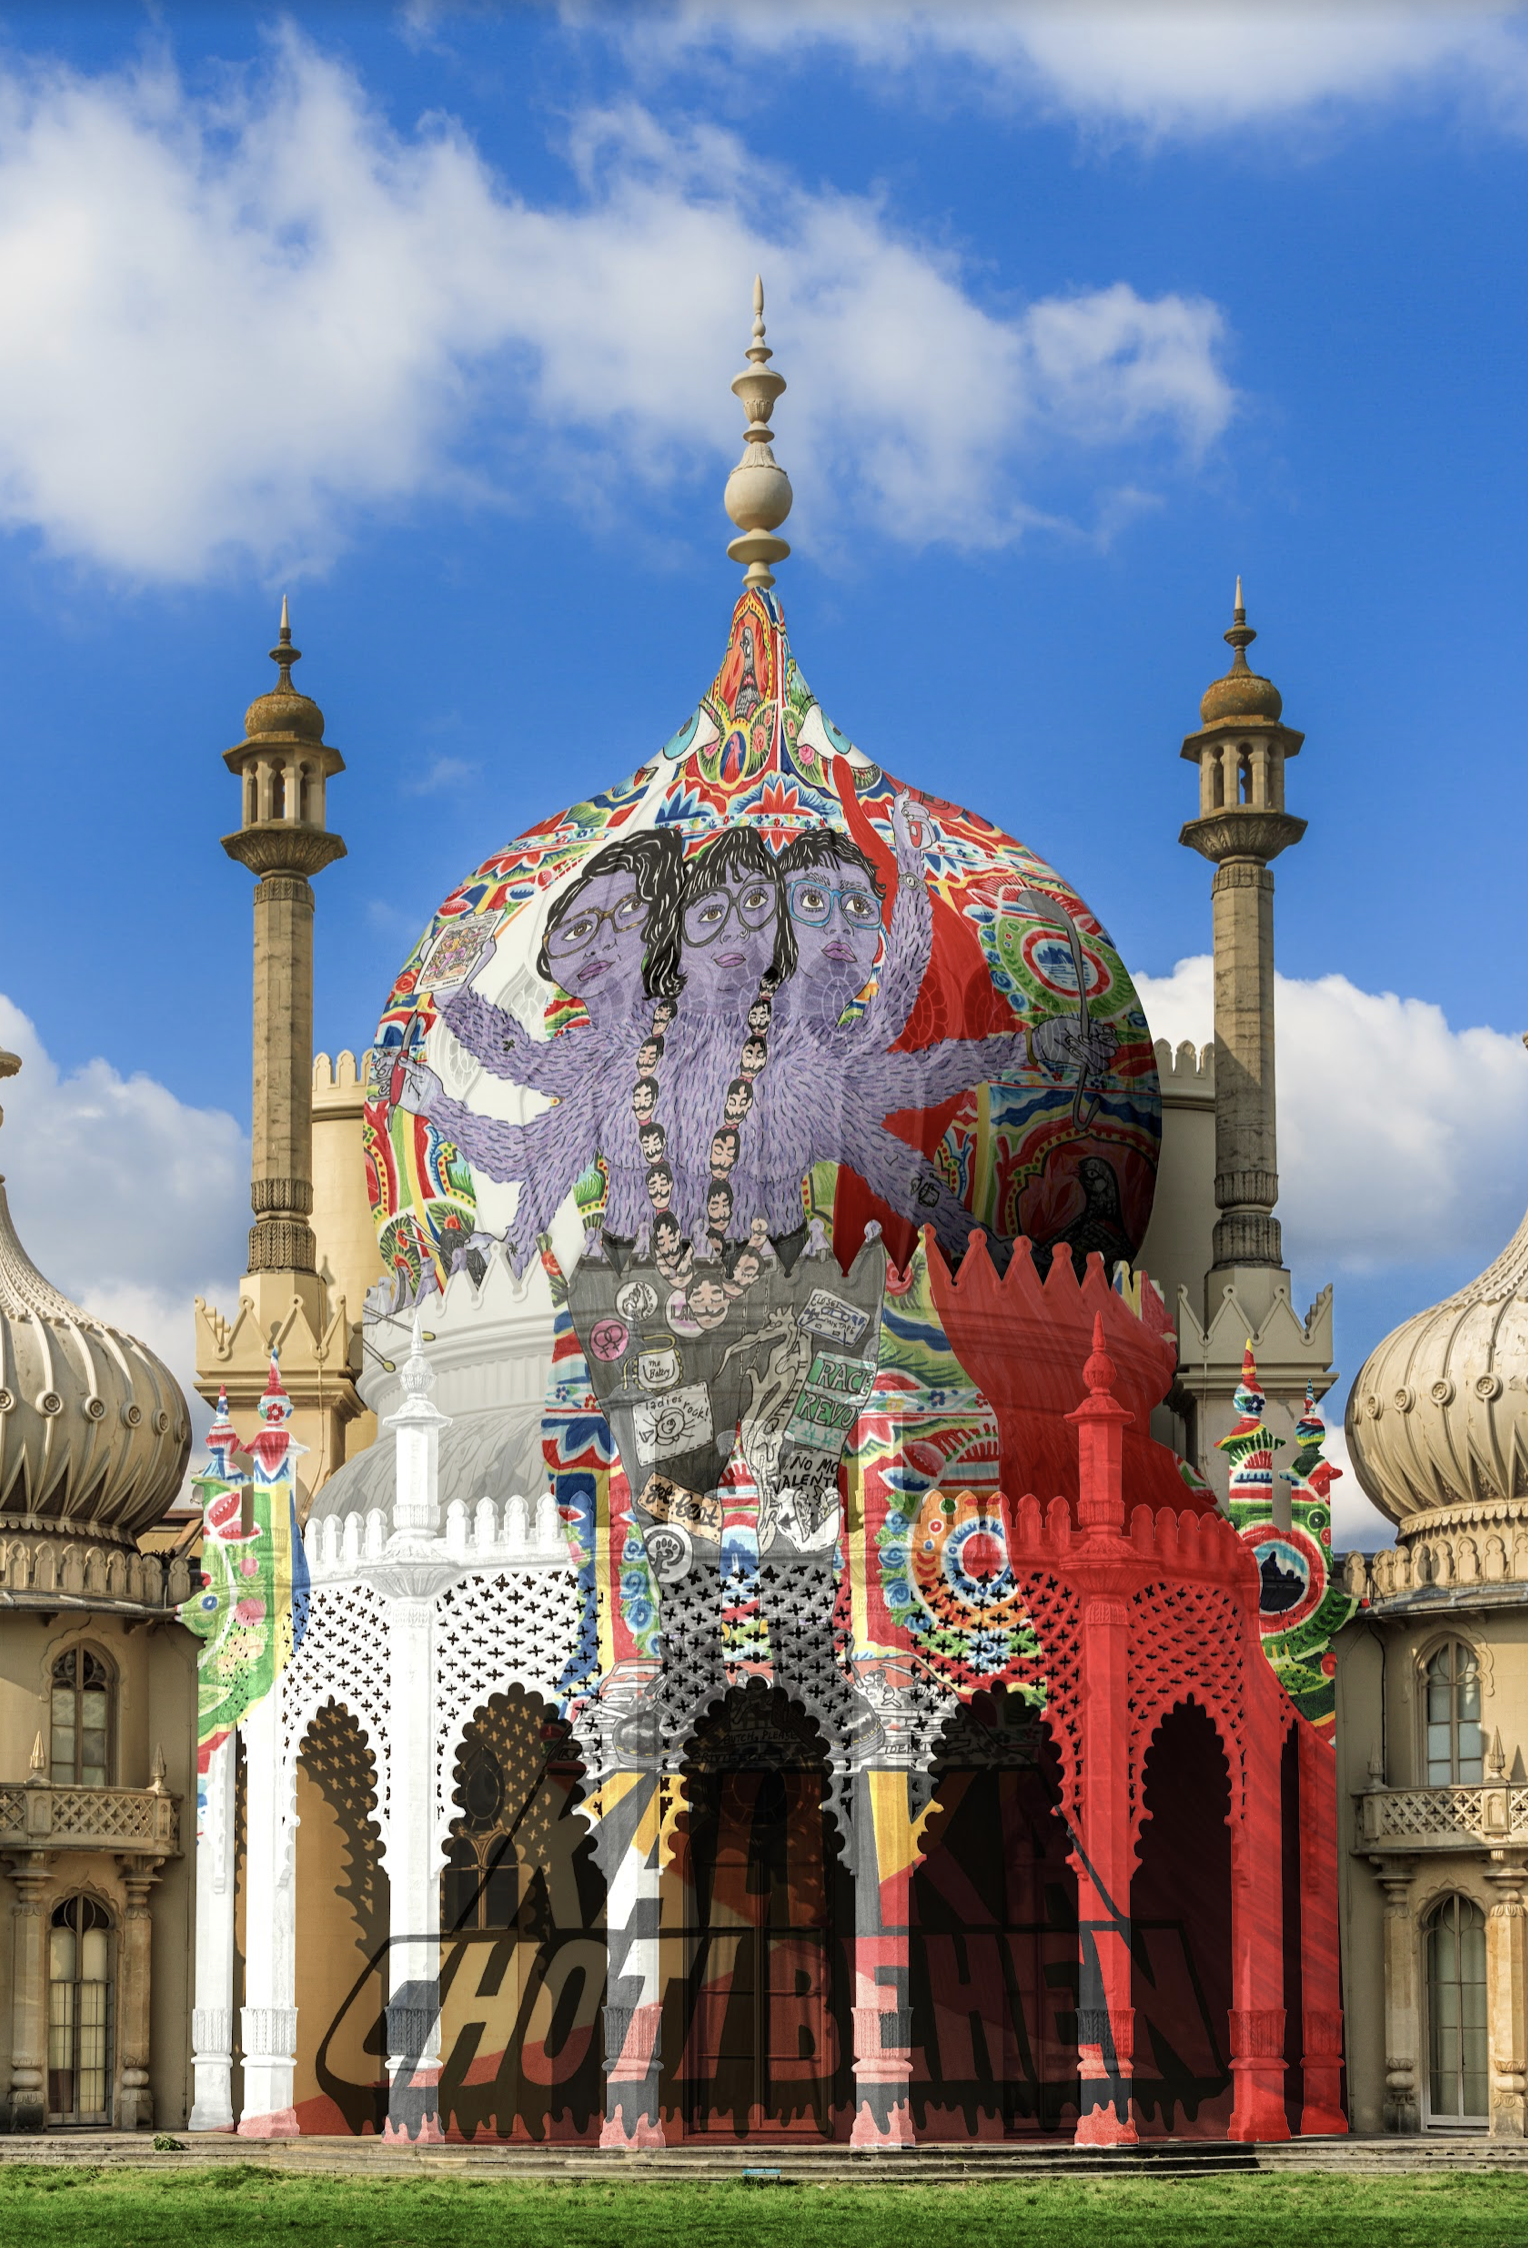 A daytime photo featuring the central dome of Brighton Pavillion (a building in the style of Indian architecture of the 19th century). On it warps a mural of a three-headed furry lilac desi-punk-dyke deity. Their similarly cropped and bespactled heads look up at two warped blue eyes gushing white tears and red blood against a bright, graphic design of birds and landscapes. A necklace of moustached heads swings over their three breasts, their desi-punk-patched black jeans and Doc Martens boots. Six arms hold black yarn, swiss army knife, tarot card, red dustpan, soup ladle, and book. They stand on a chunky title ‘Kali Ka Choti Behen’ with the rivers of tears and blood crossing over within the letters.